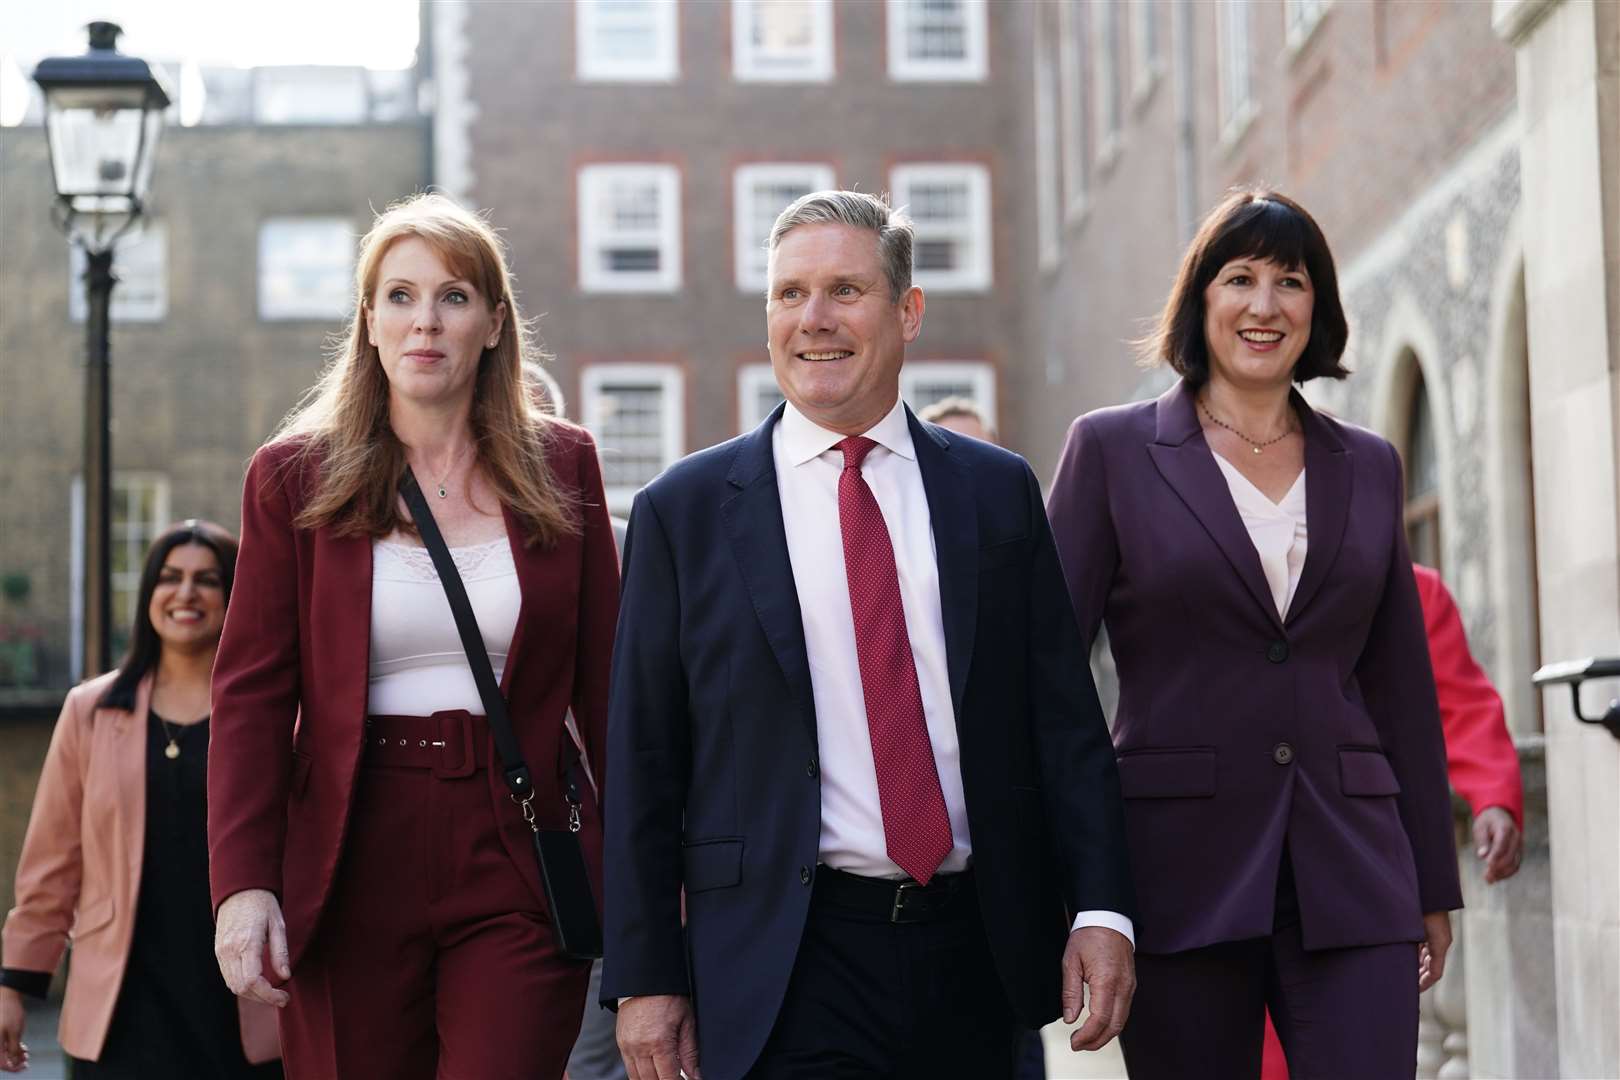 Sir Keir Starmer is considering forming a cabinet inner circle with Angela Rayner, Rachel Reeves and Pat McFadden, the Times reported (Jordan Pettitt/PA)